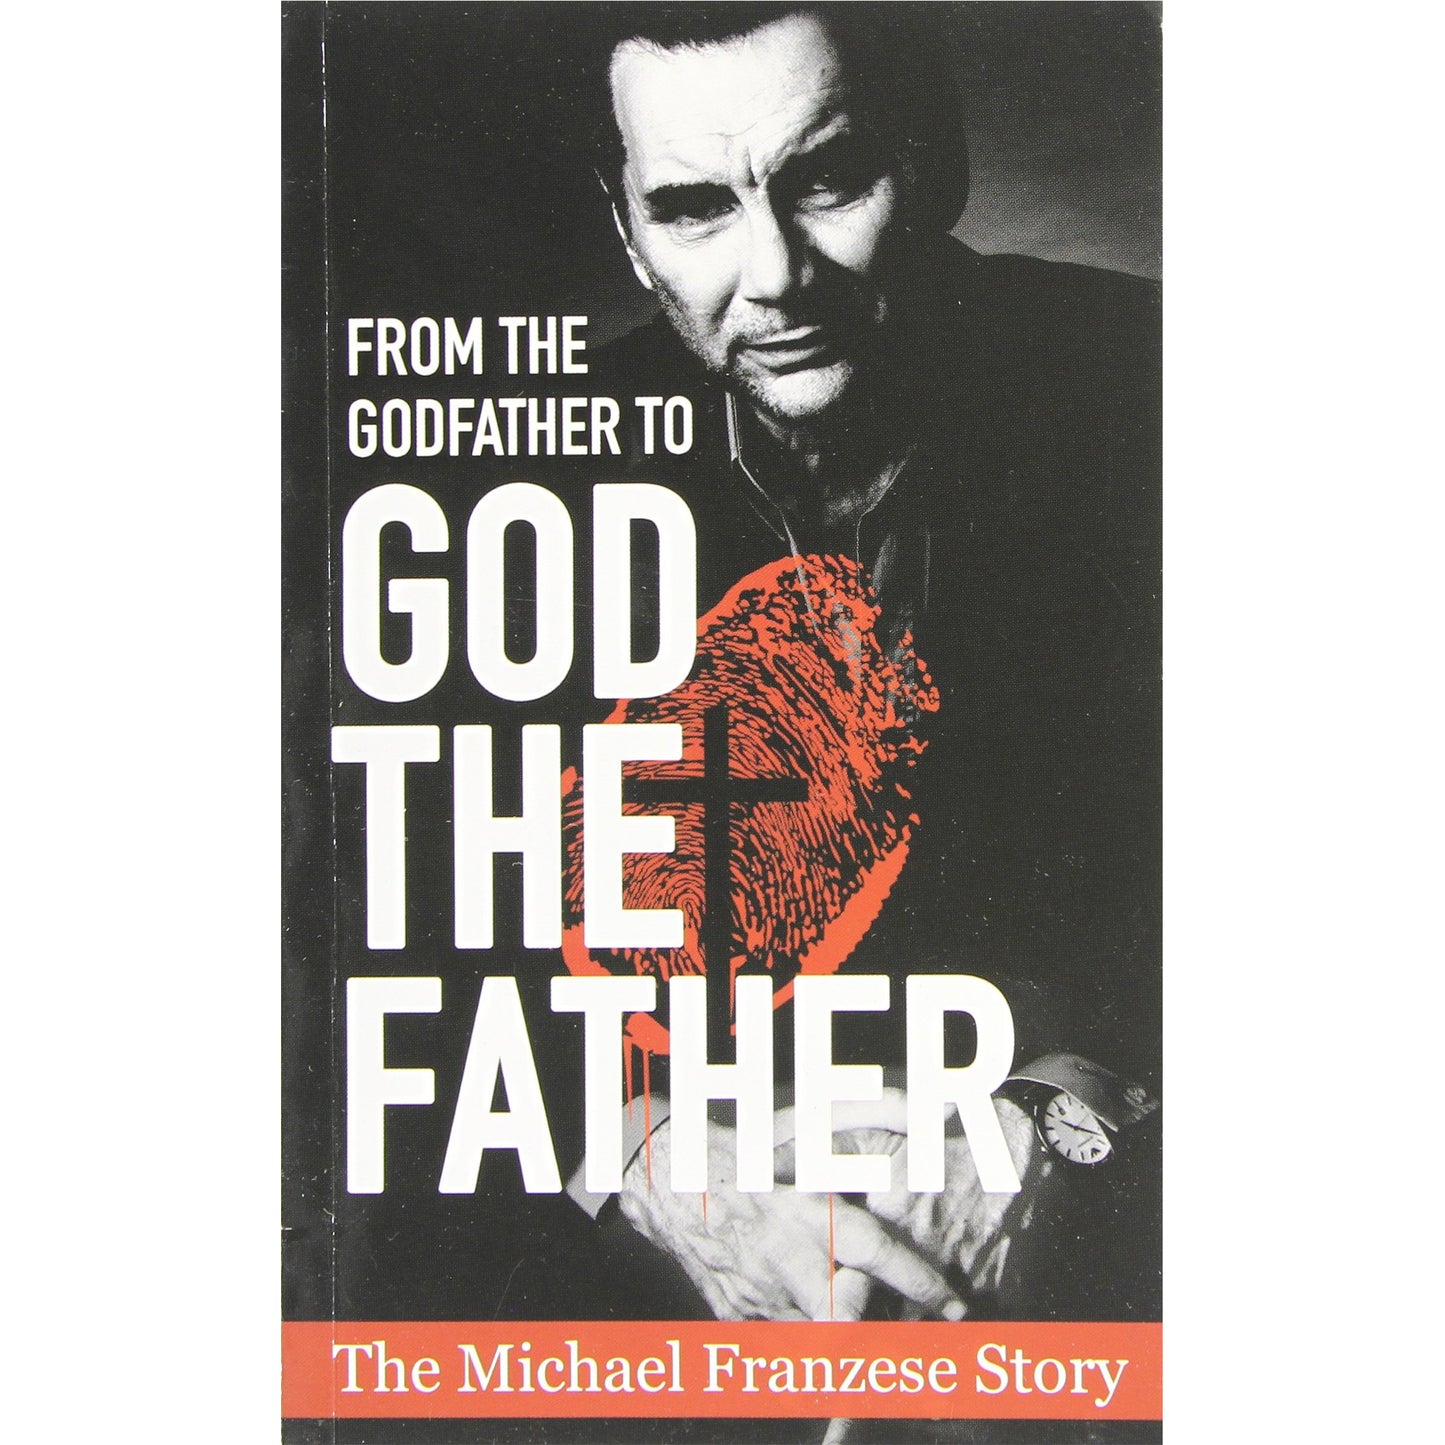 **AUTOGRAPHED** From The Godfather to God The Father